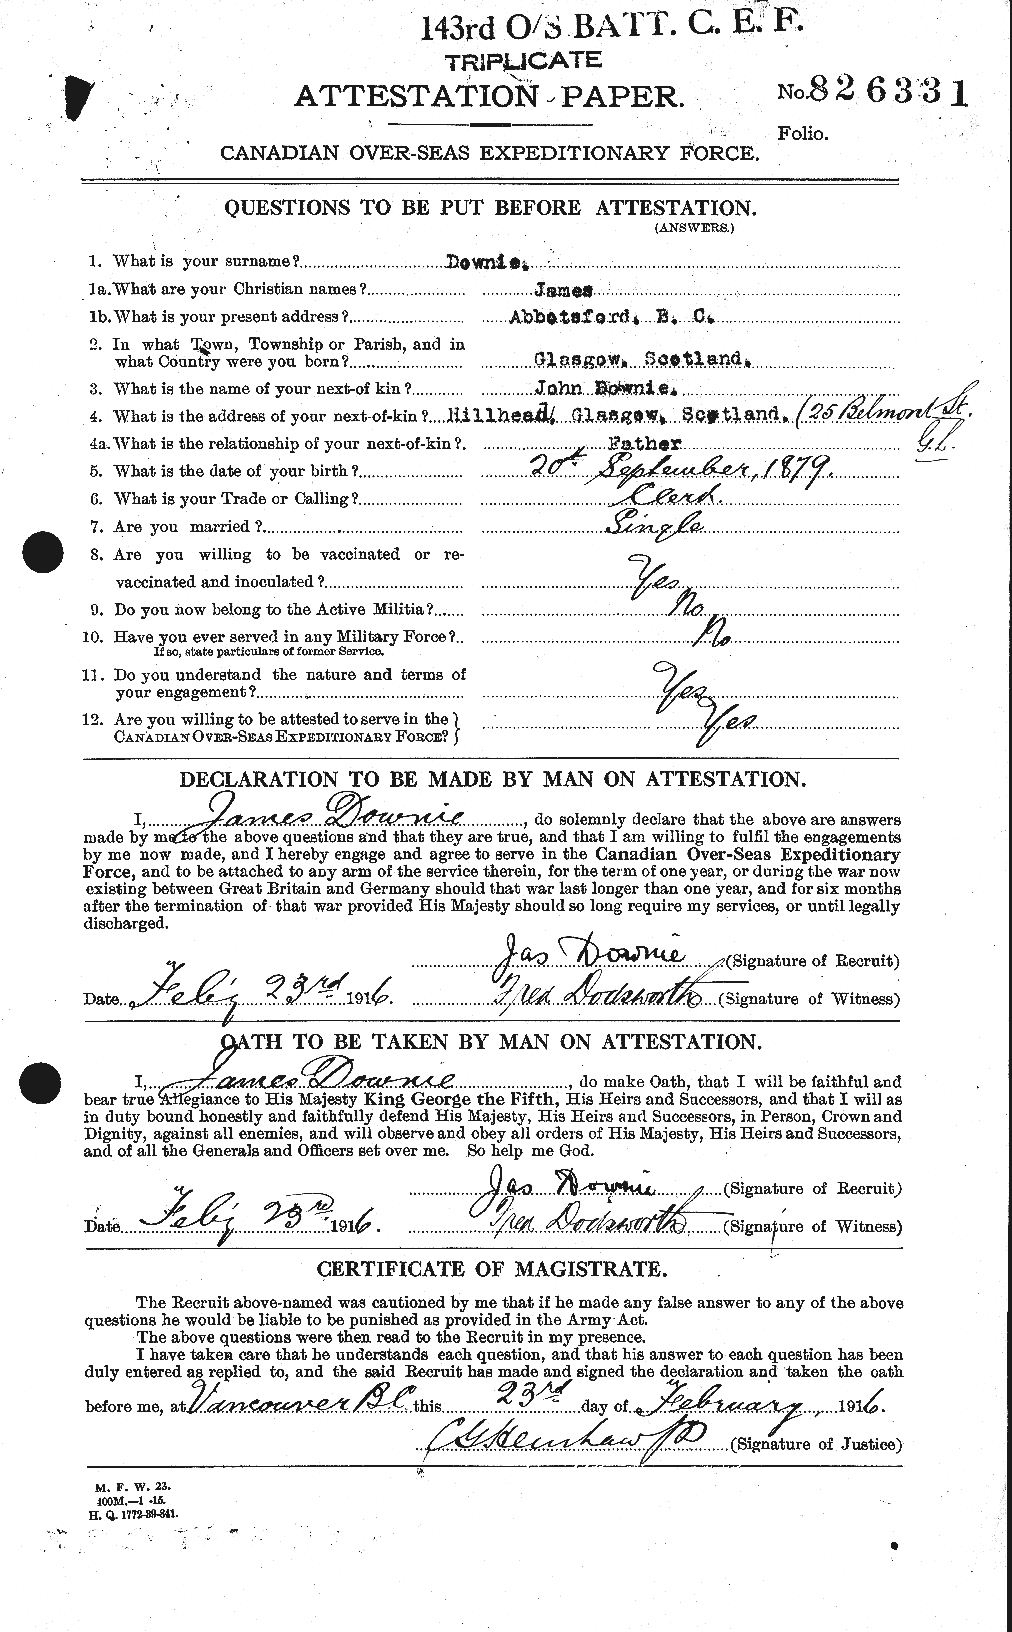 Personnel Records of the First World War - CEF 297187a